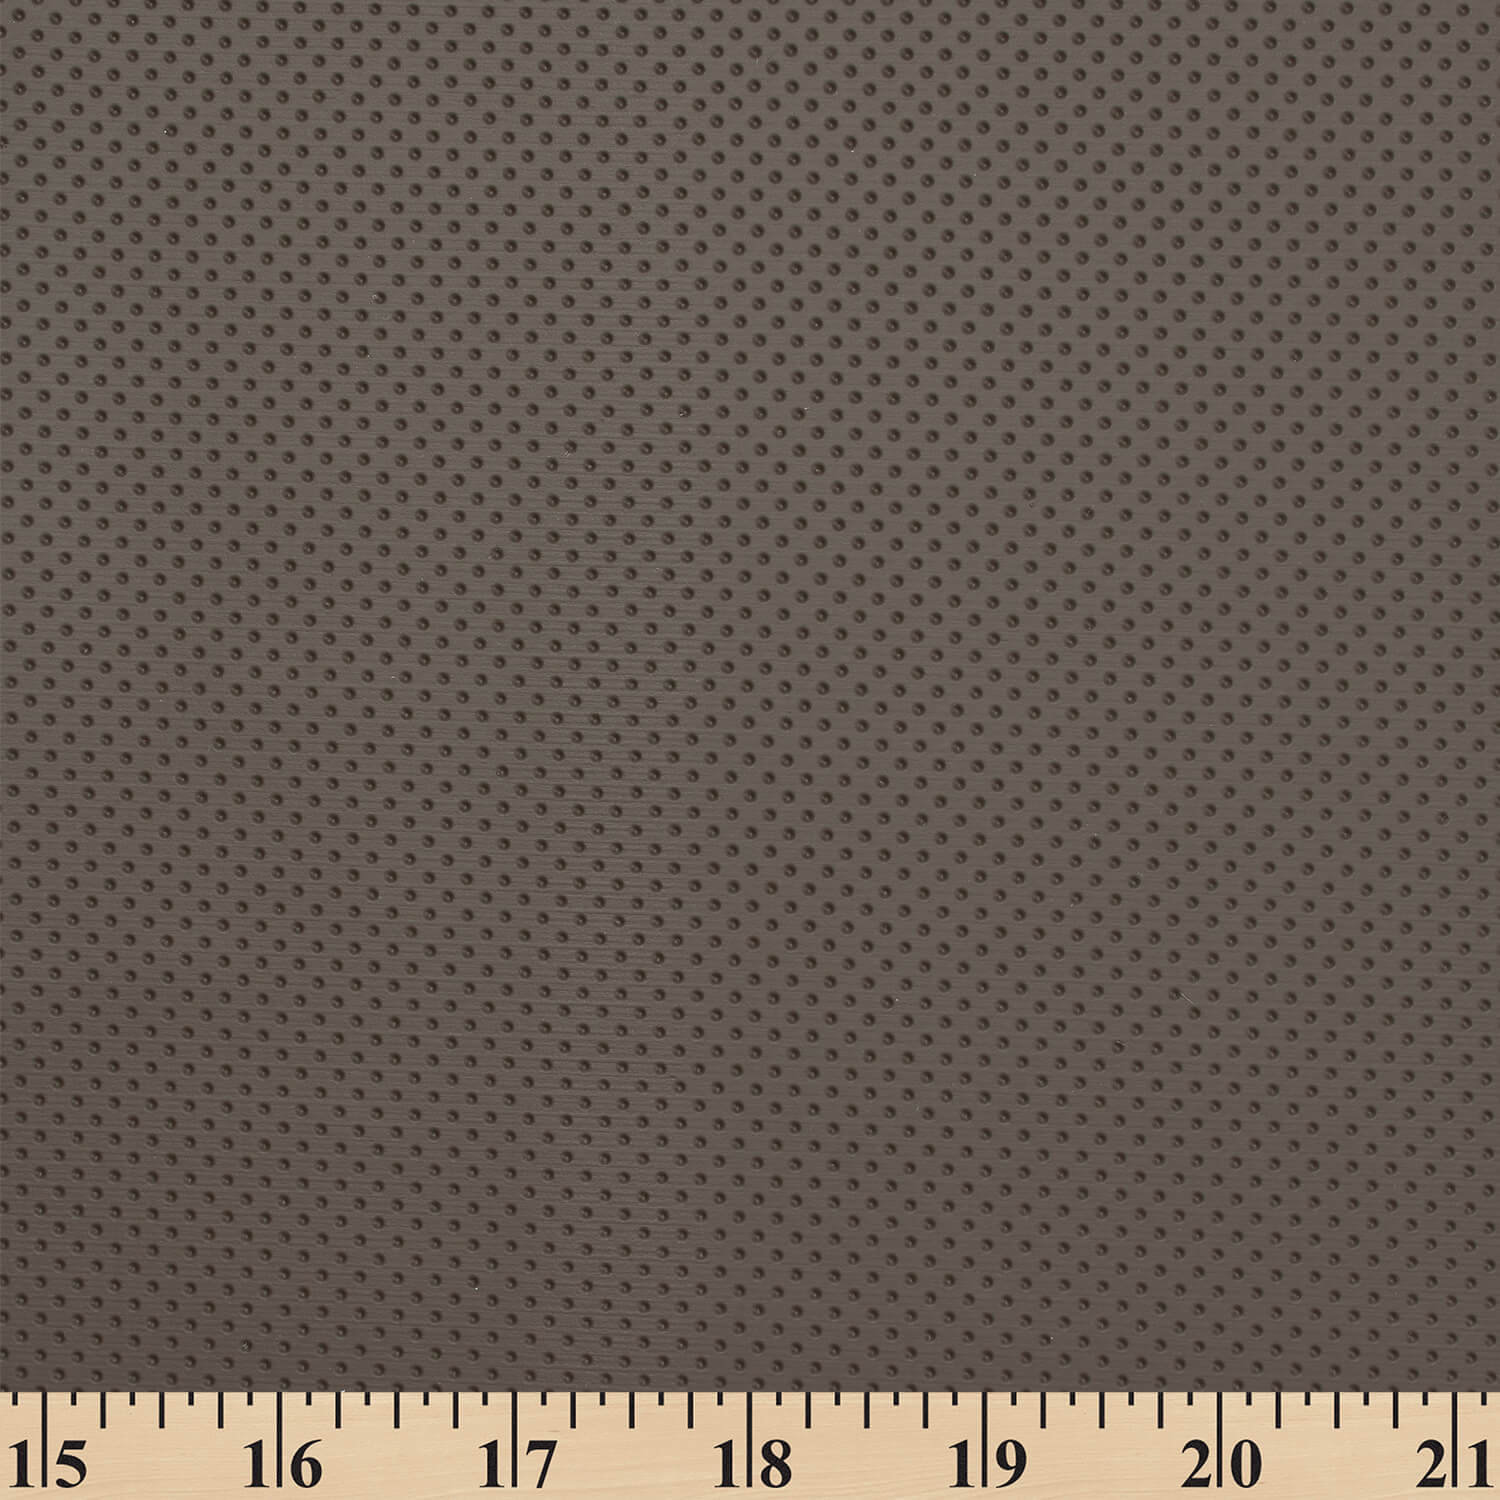 Ottertex Vinyl Fabric Faux Leather Pleather Upholstery 54 Wide by The Yard  (Black)